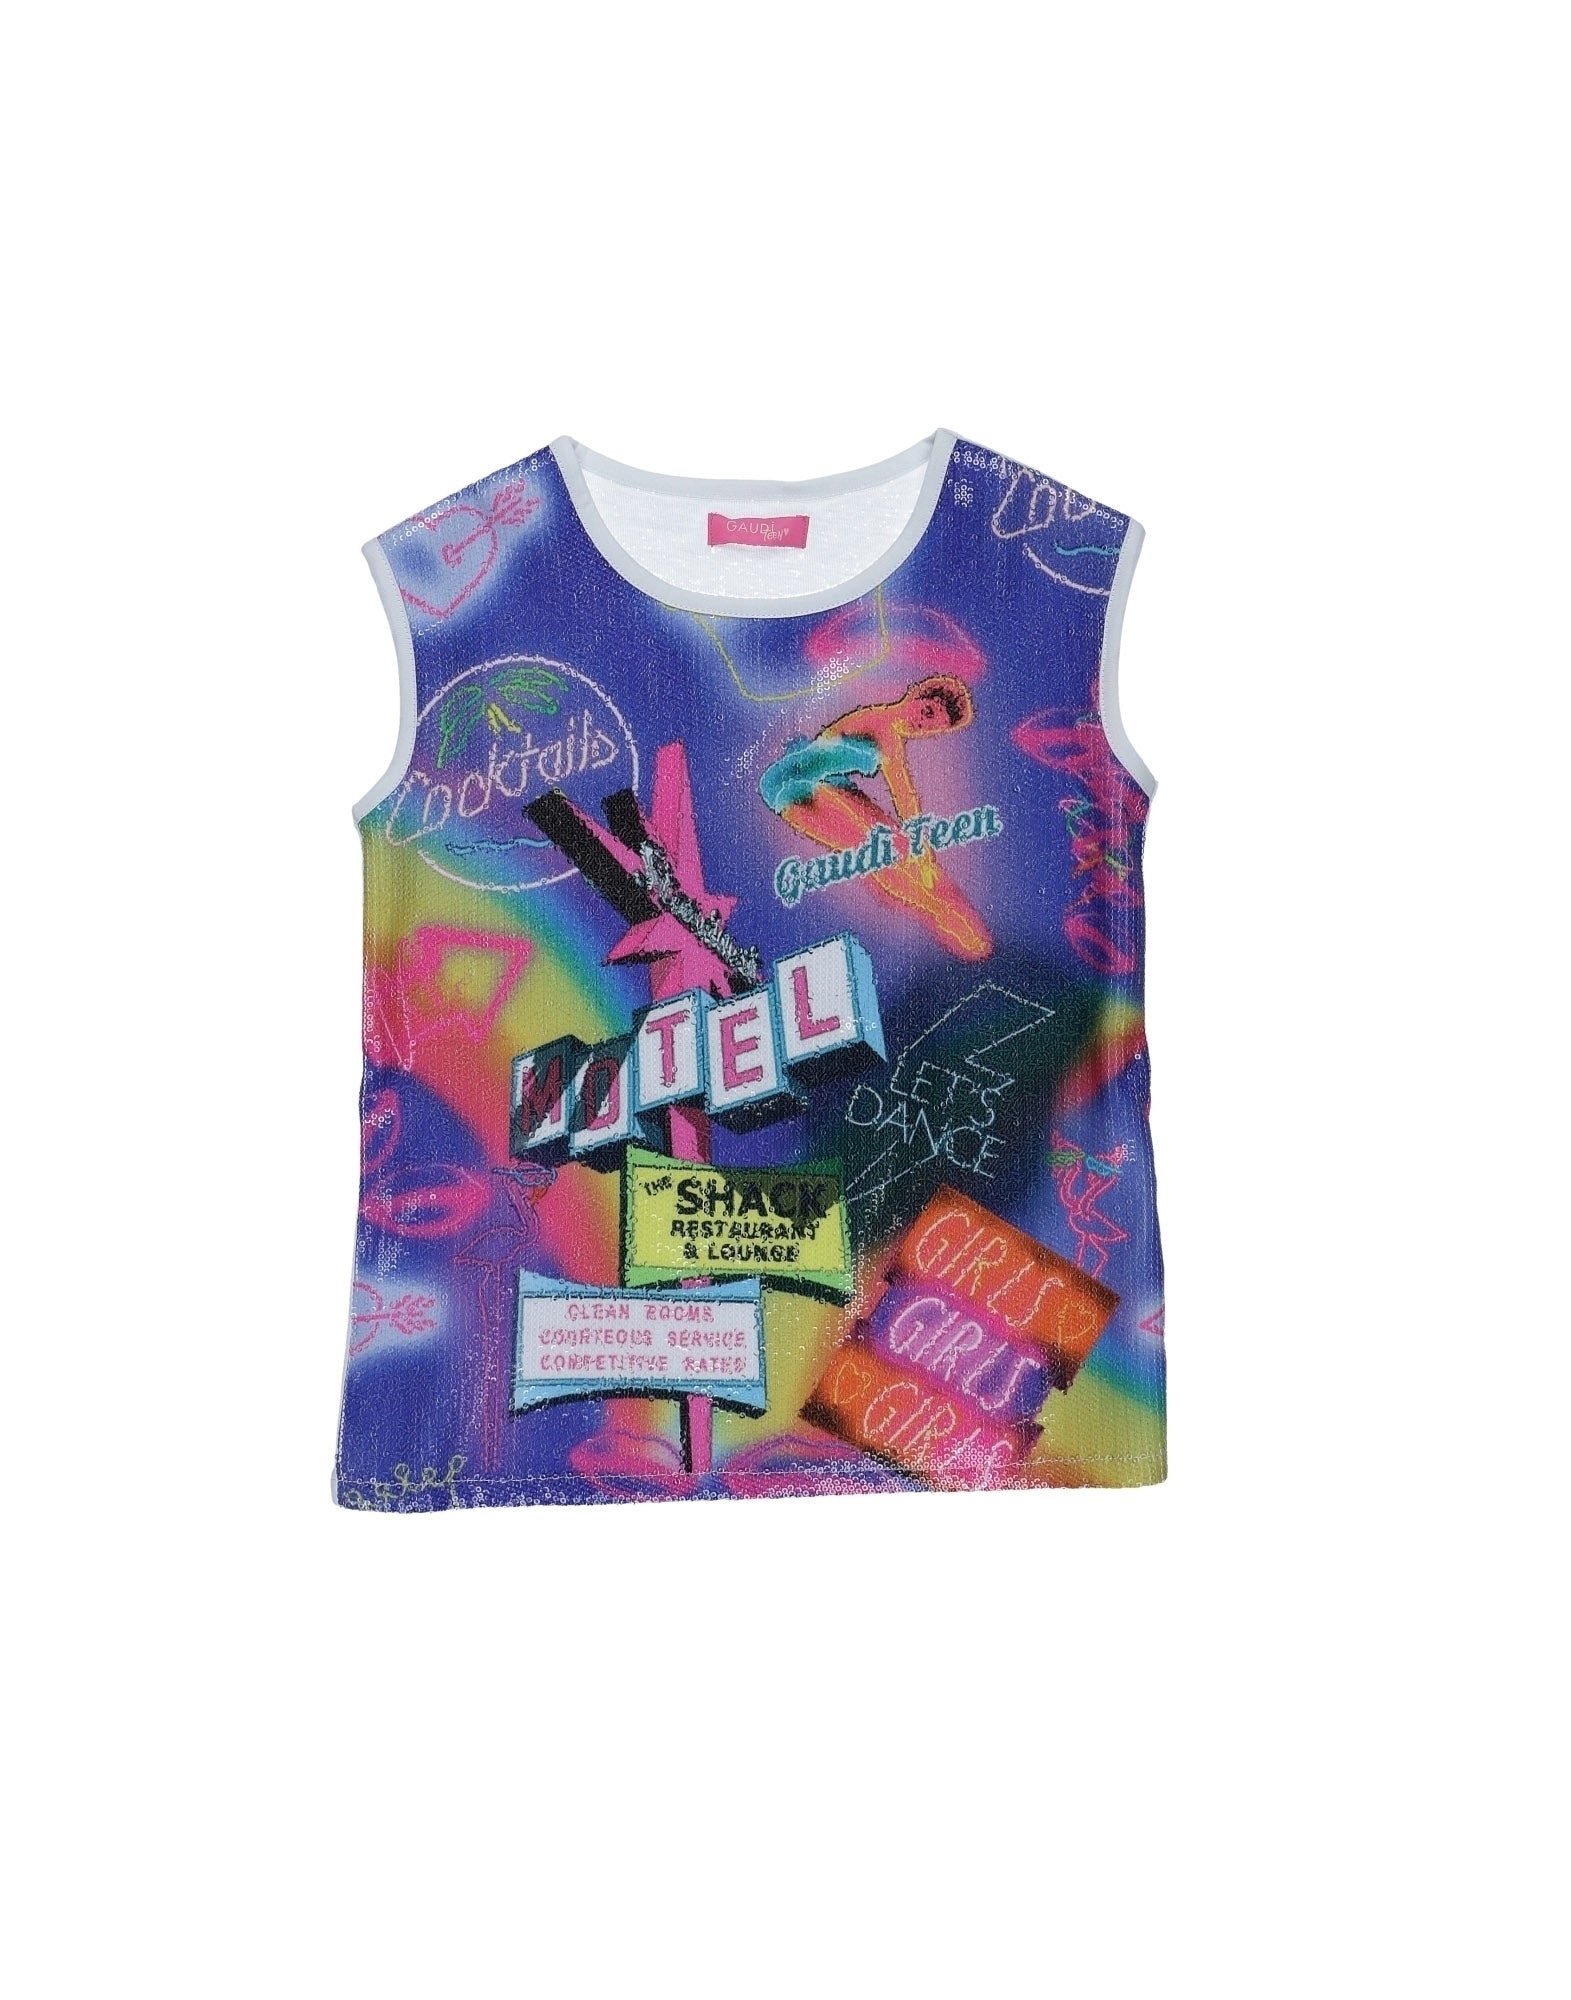 GAUDI TEEN T-Shirt Top Size 8Y Printed Front Coated Sequins Pattern Sleeveless gallery main photo